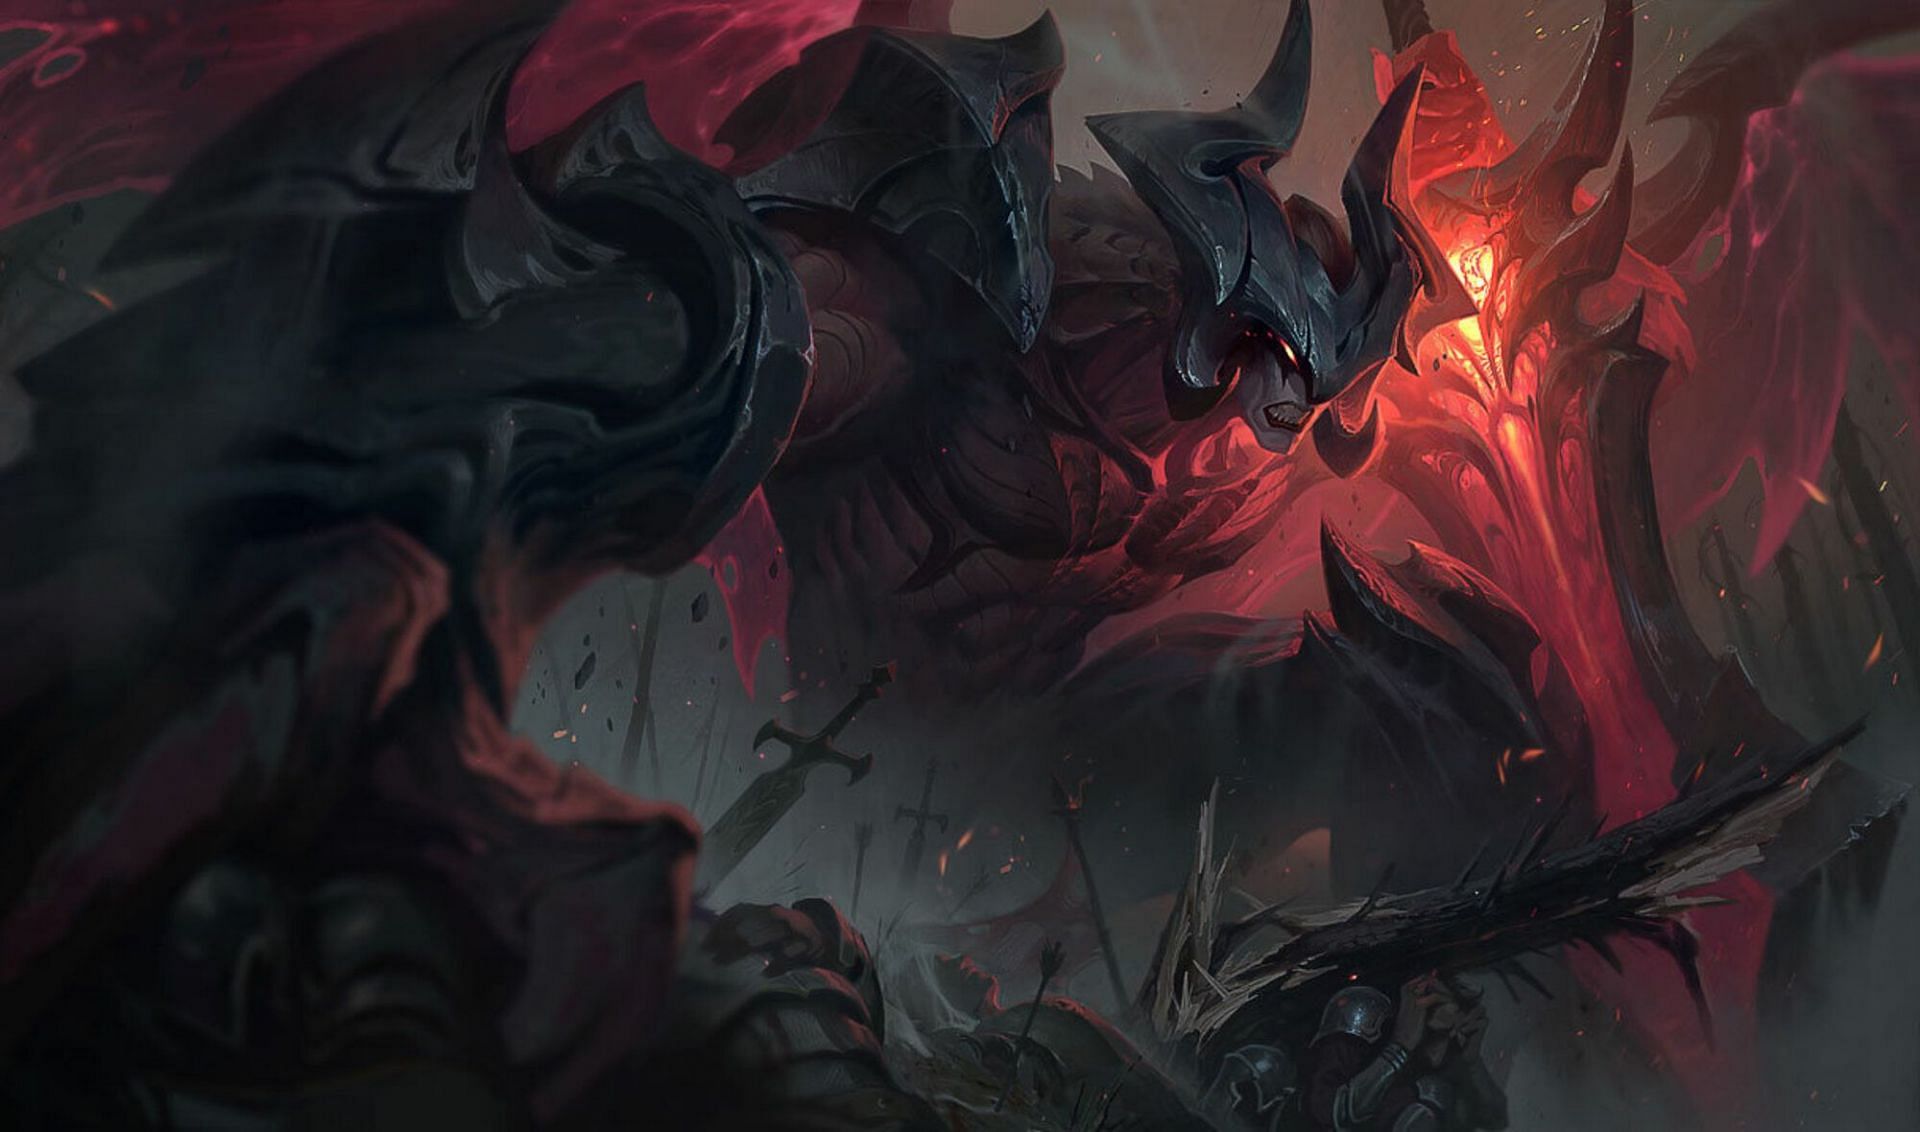 League of Legends: The Strongest Champions According To The Lore